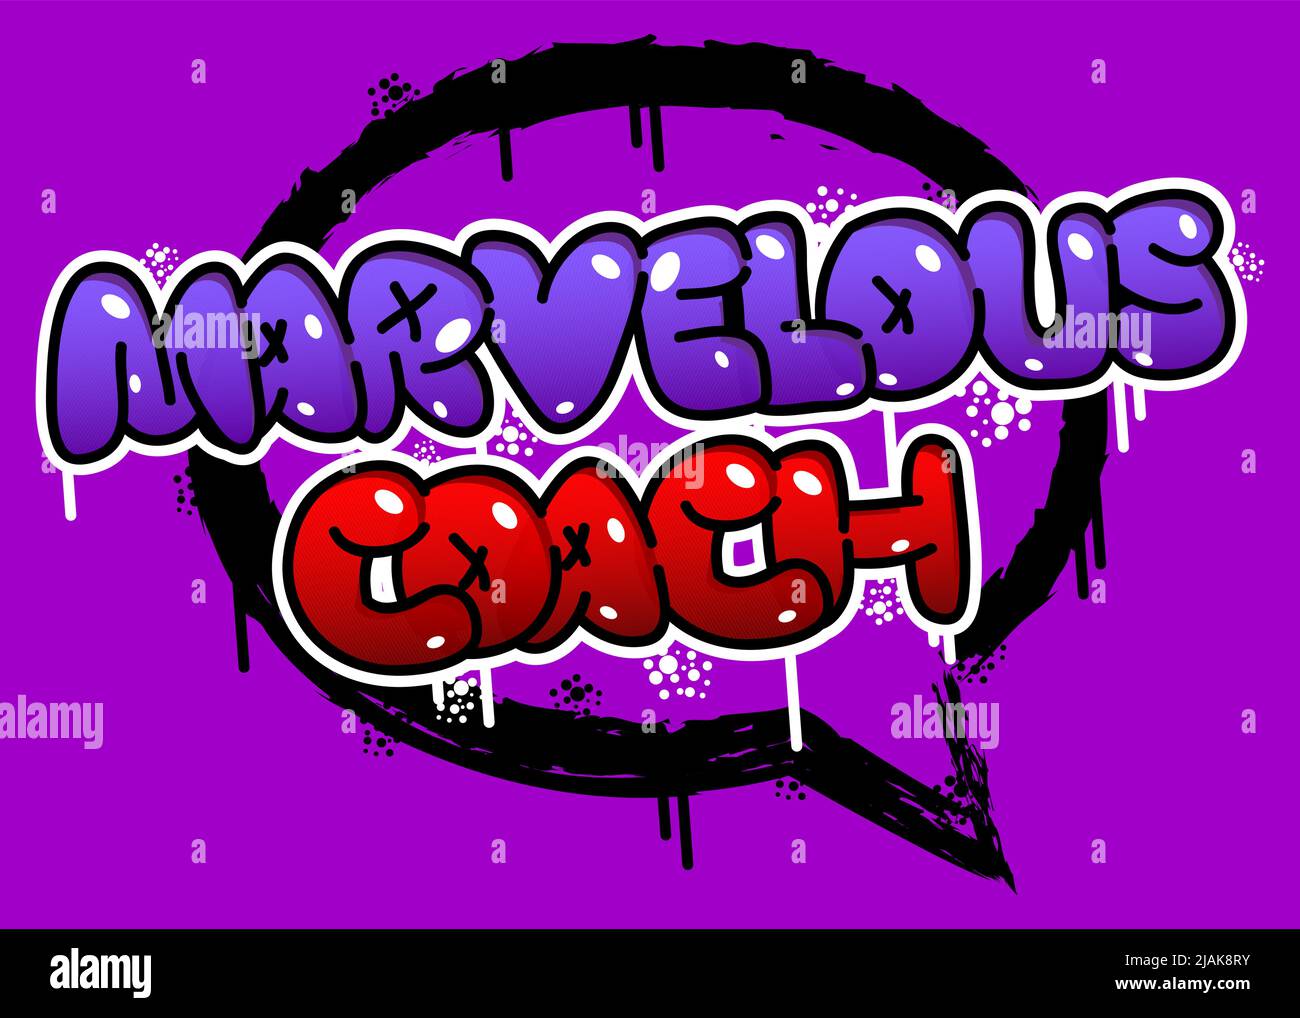 Coach. Graffiti tag. Abstract modern street art decoration performed in urban painting style. Stock Vector